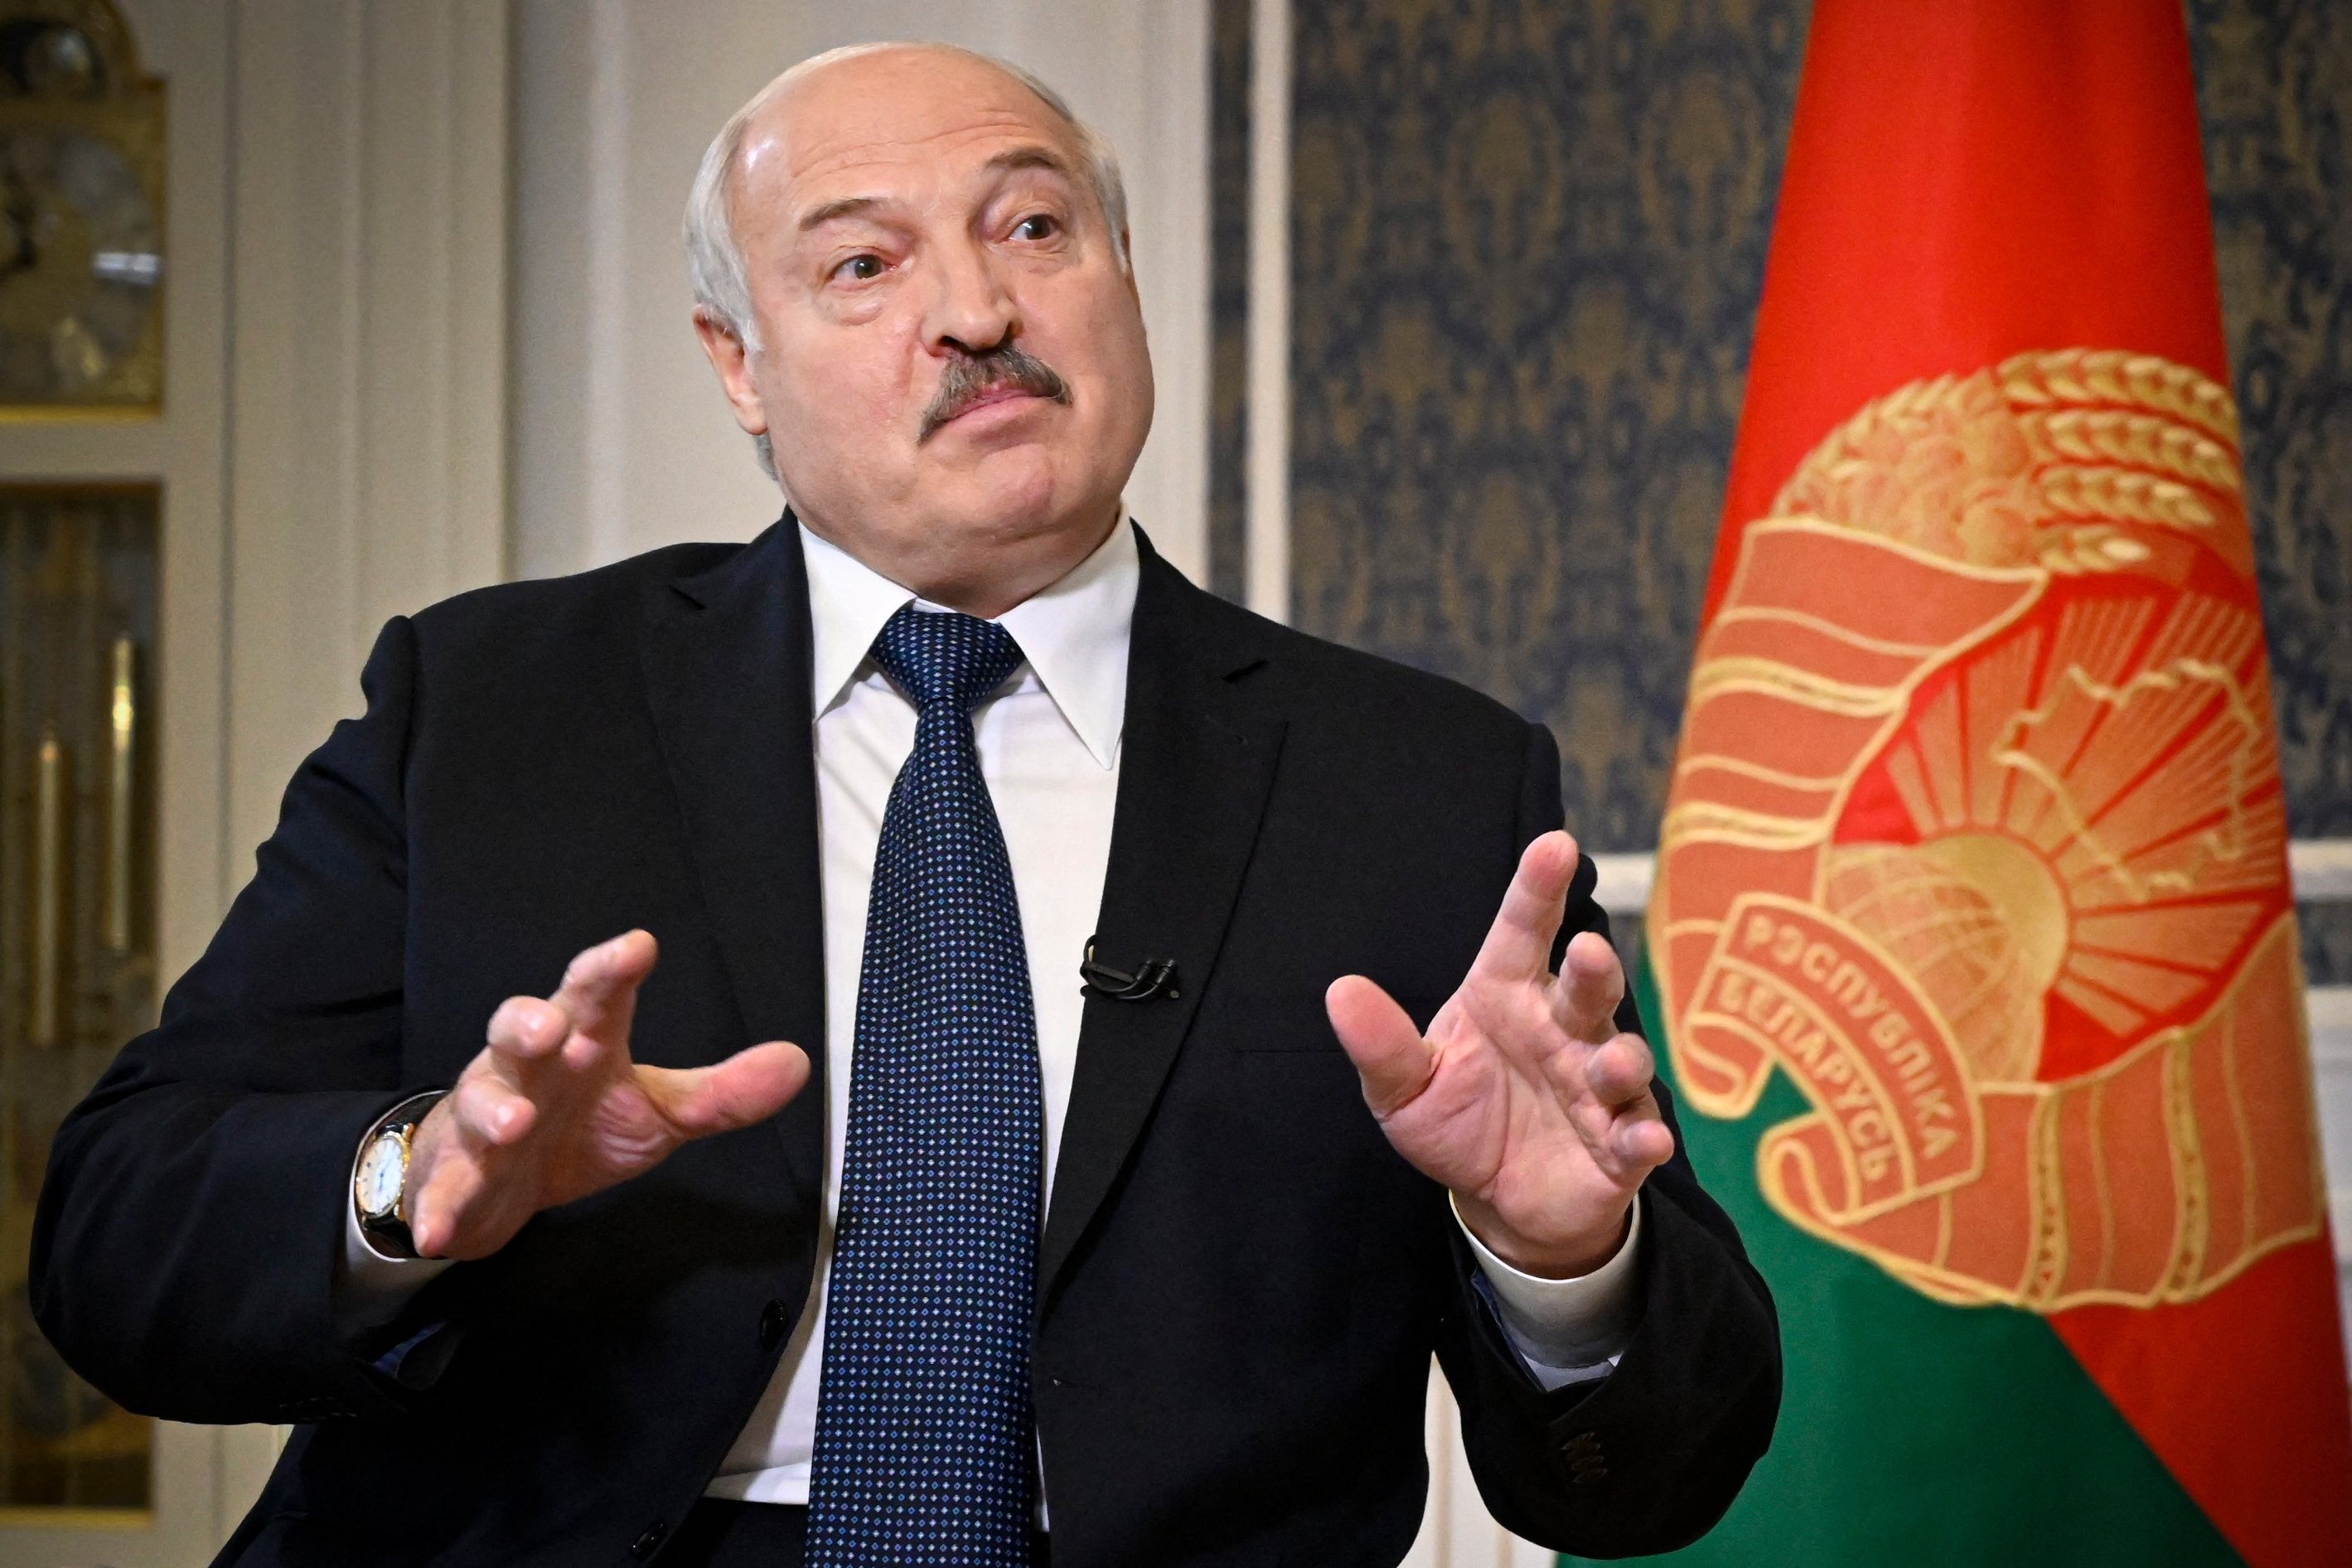 Belarus' President Alexander Lukashenko speaks during an interview at his residence, the Independence Palace, in the capital Minsk, on July 21.